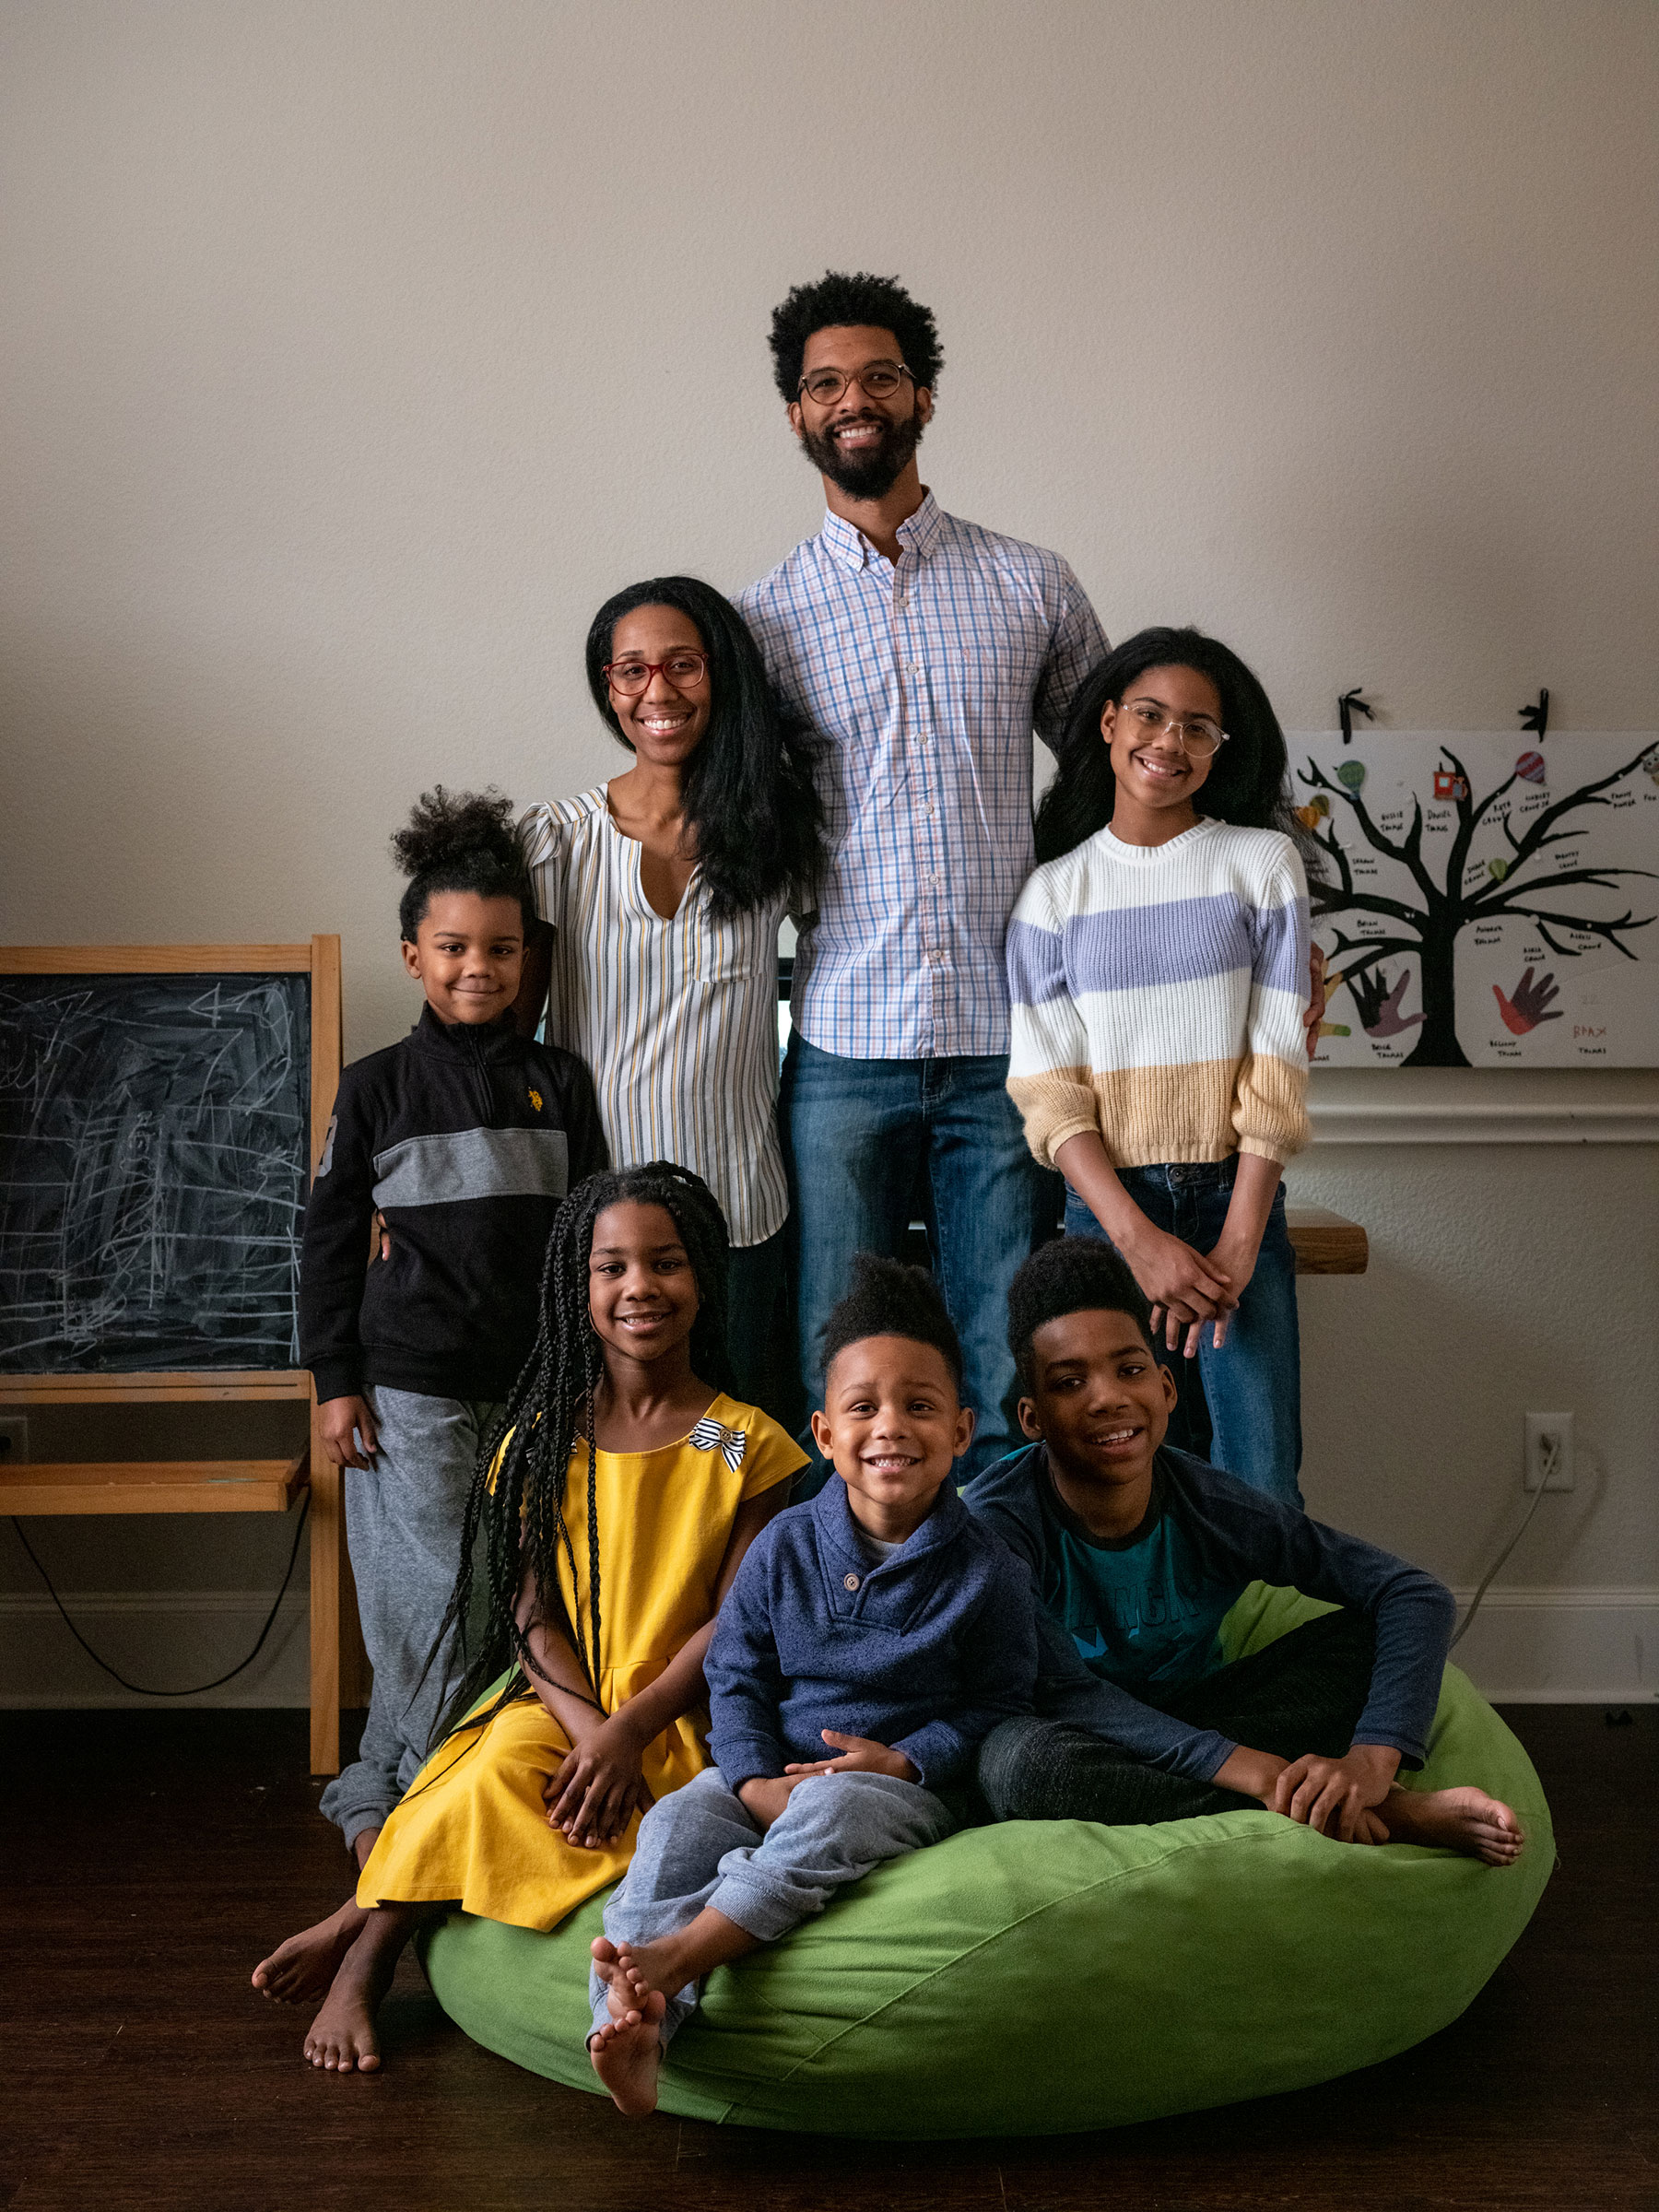 The Thomas family poses for a portrait in their home in Richardson. (Ilana Panich-Linsman for TIME)